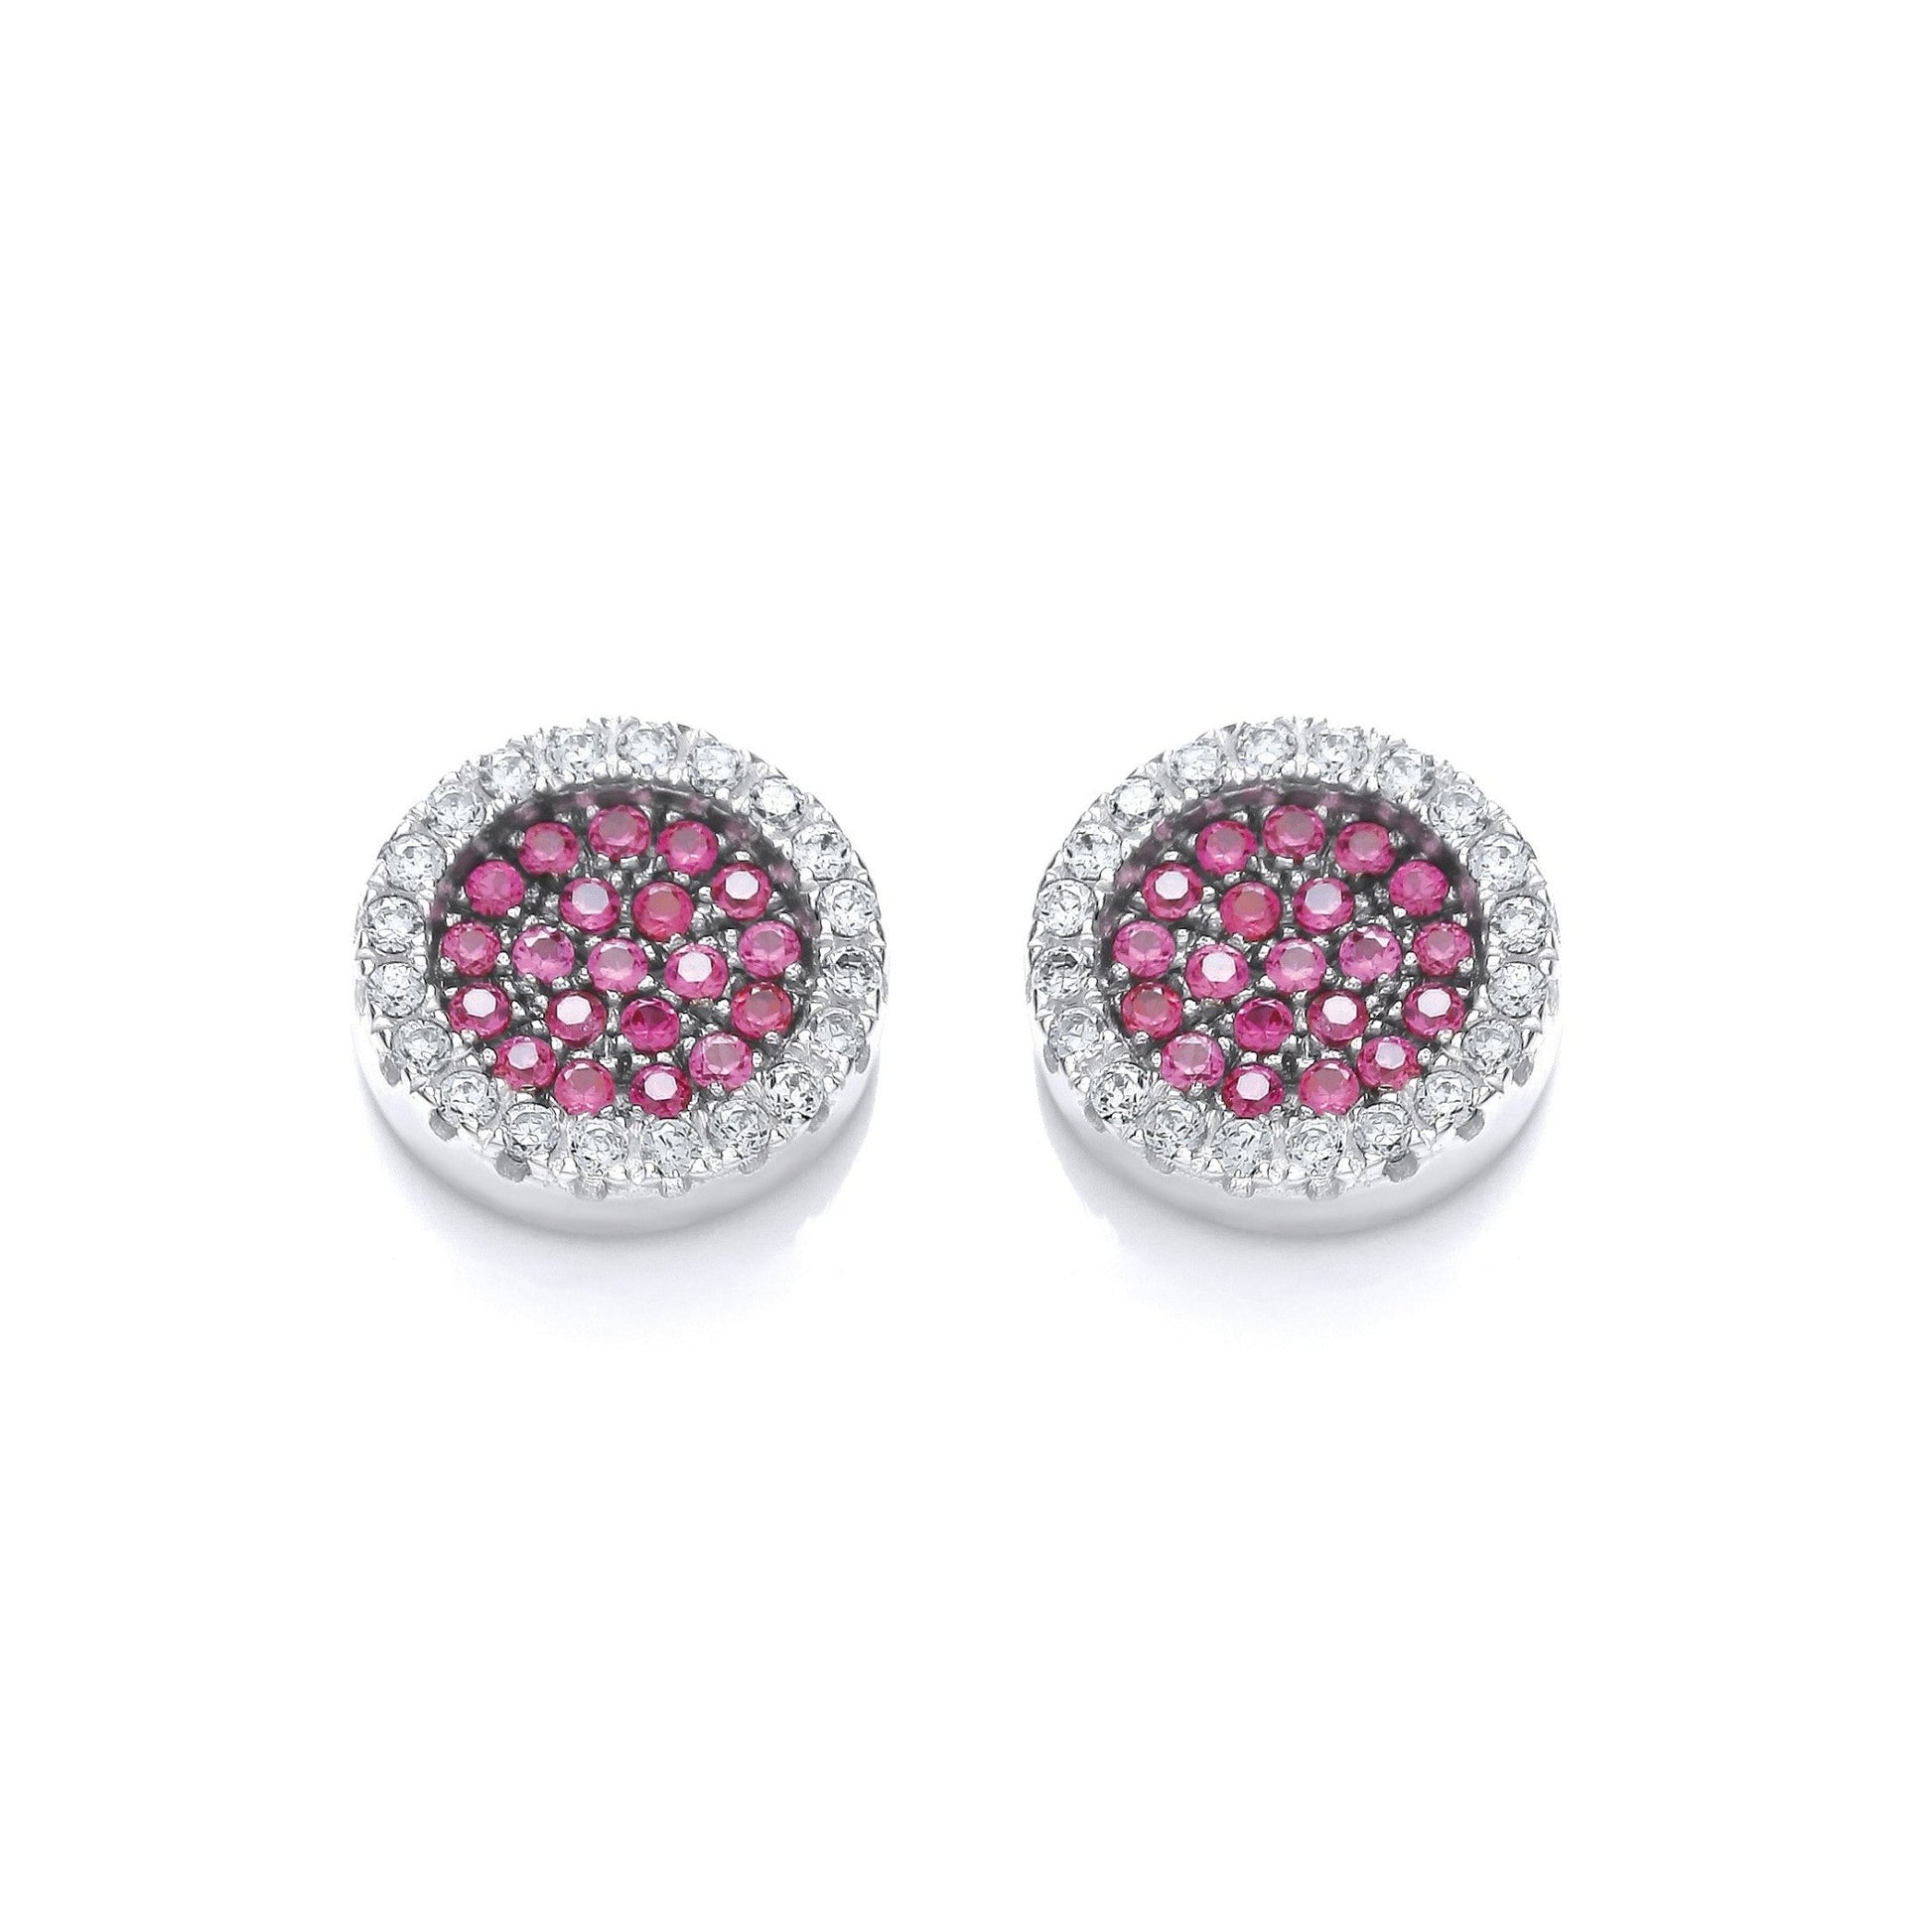 Cluster Stud 925 Sterling Silver Earrings Set With Red CZs - FJewellery